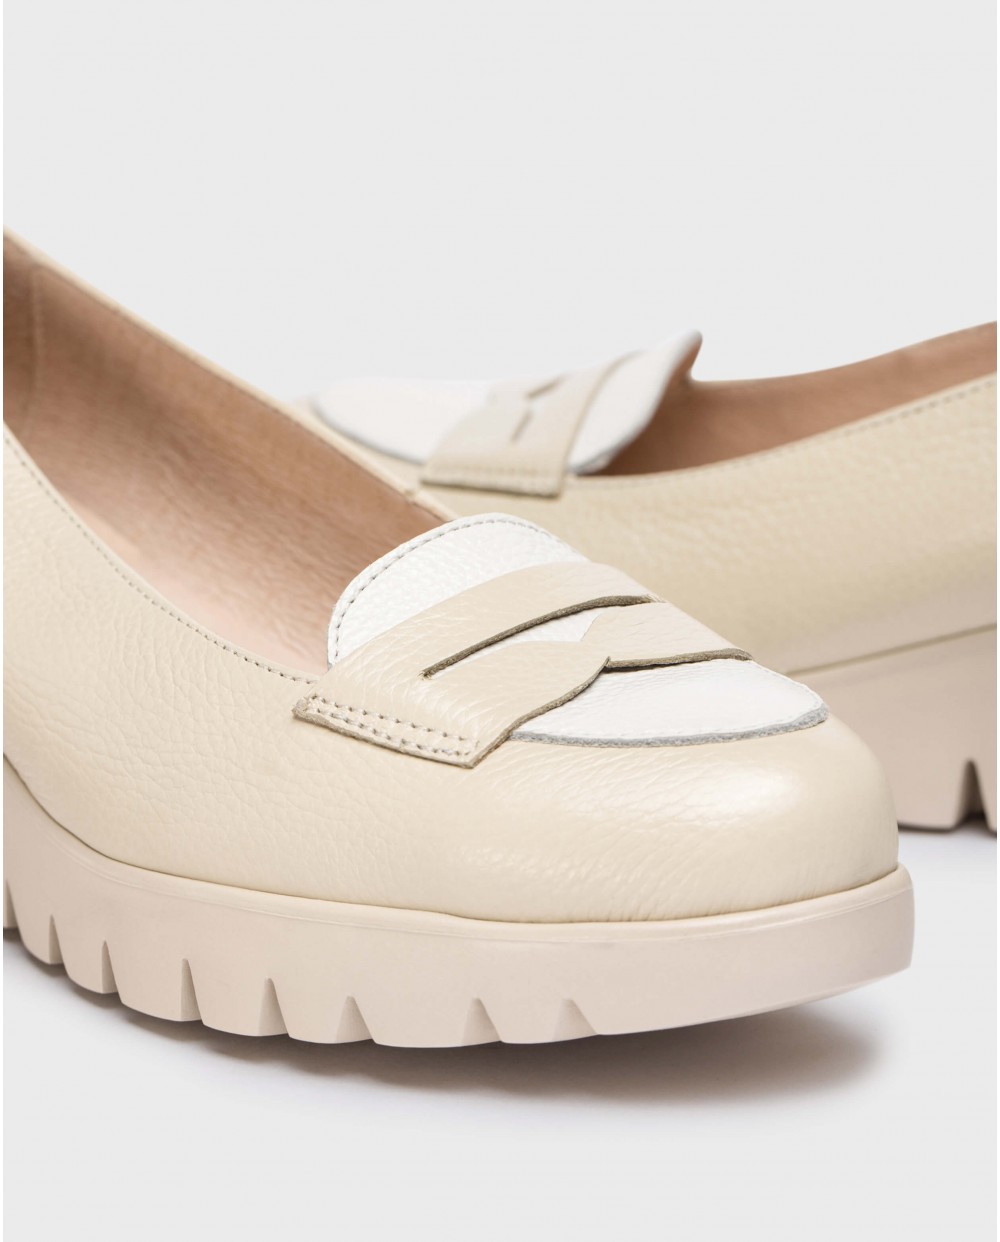 Wonders-Loafers-Cream Moccasin